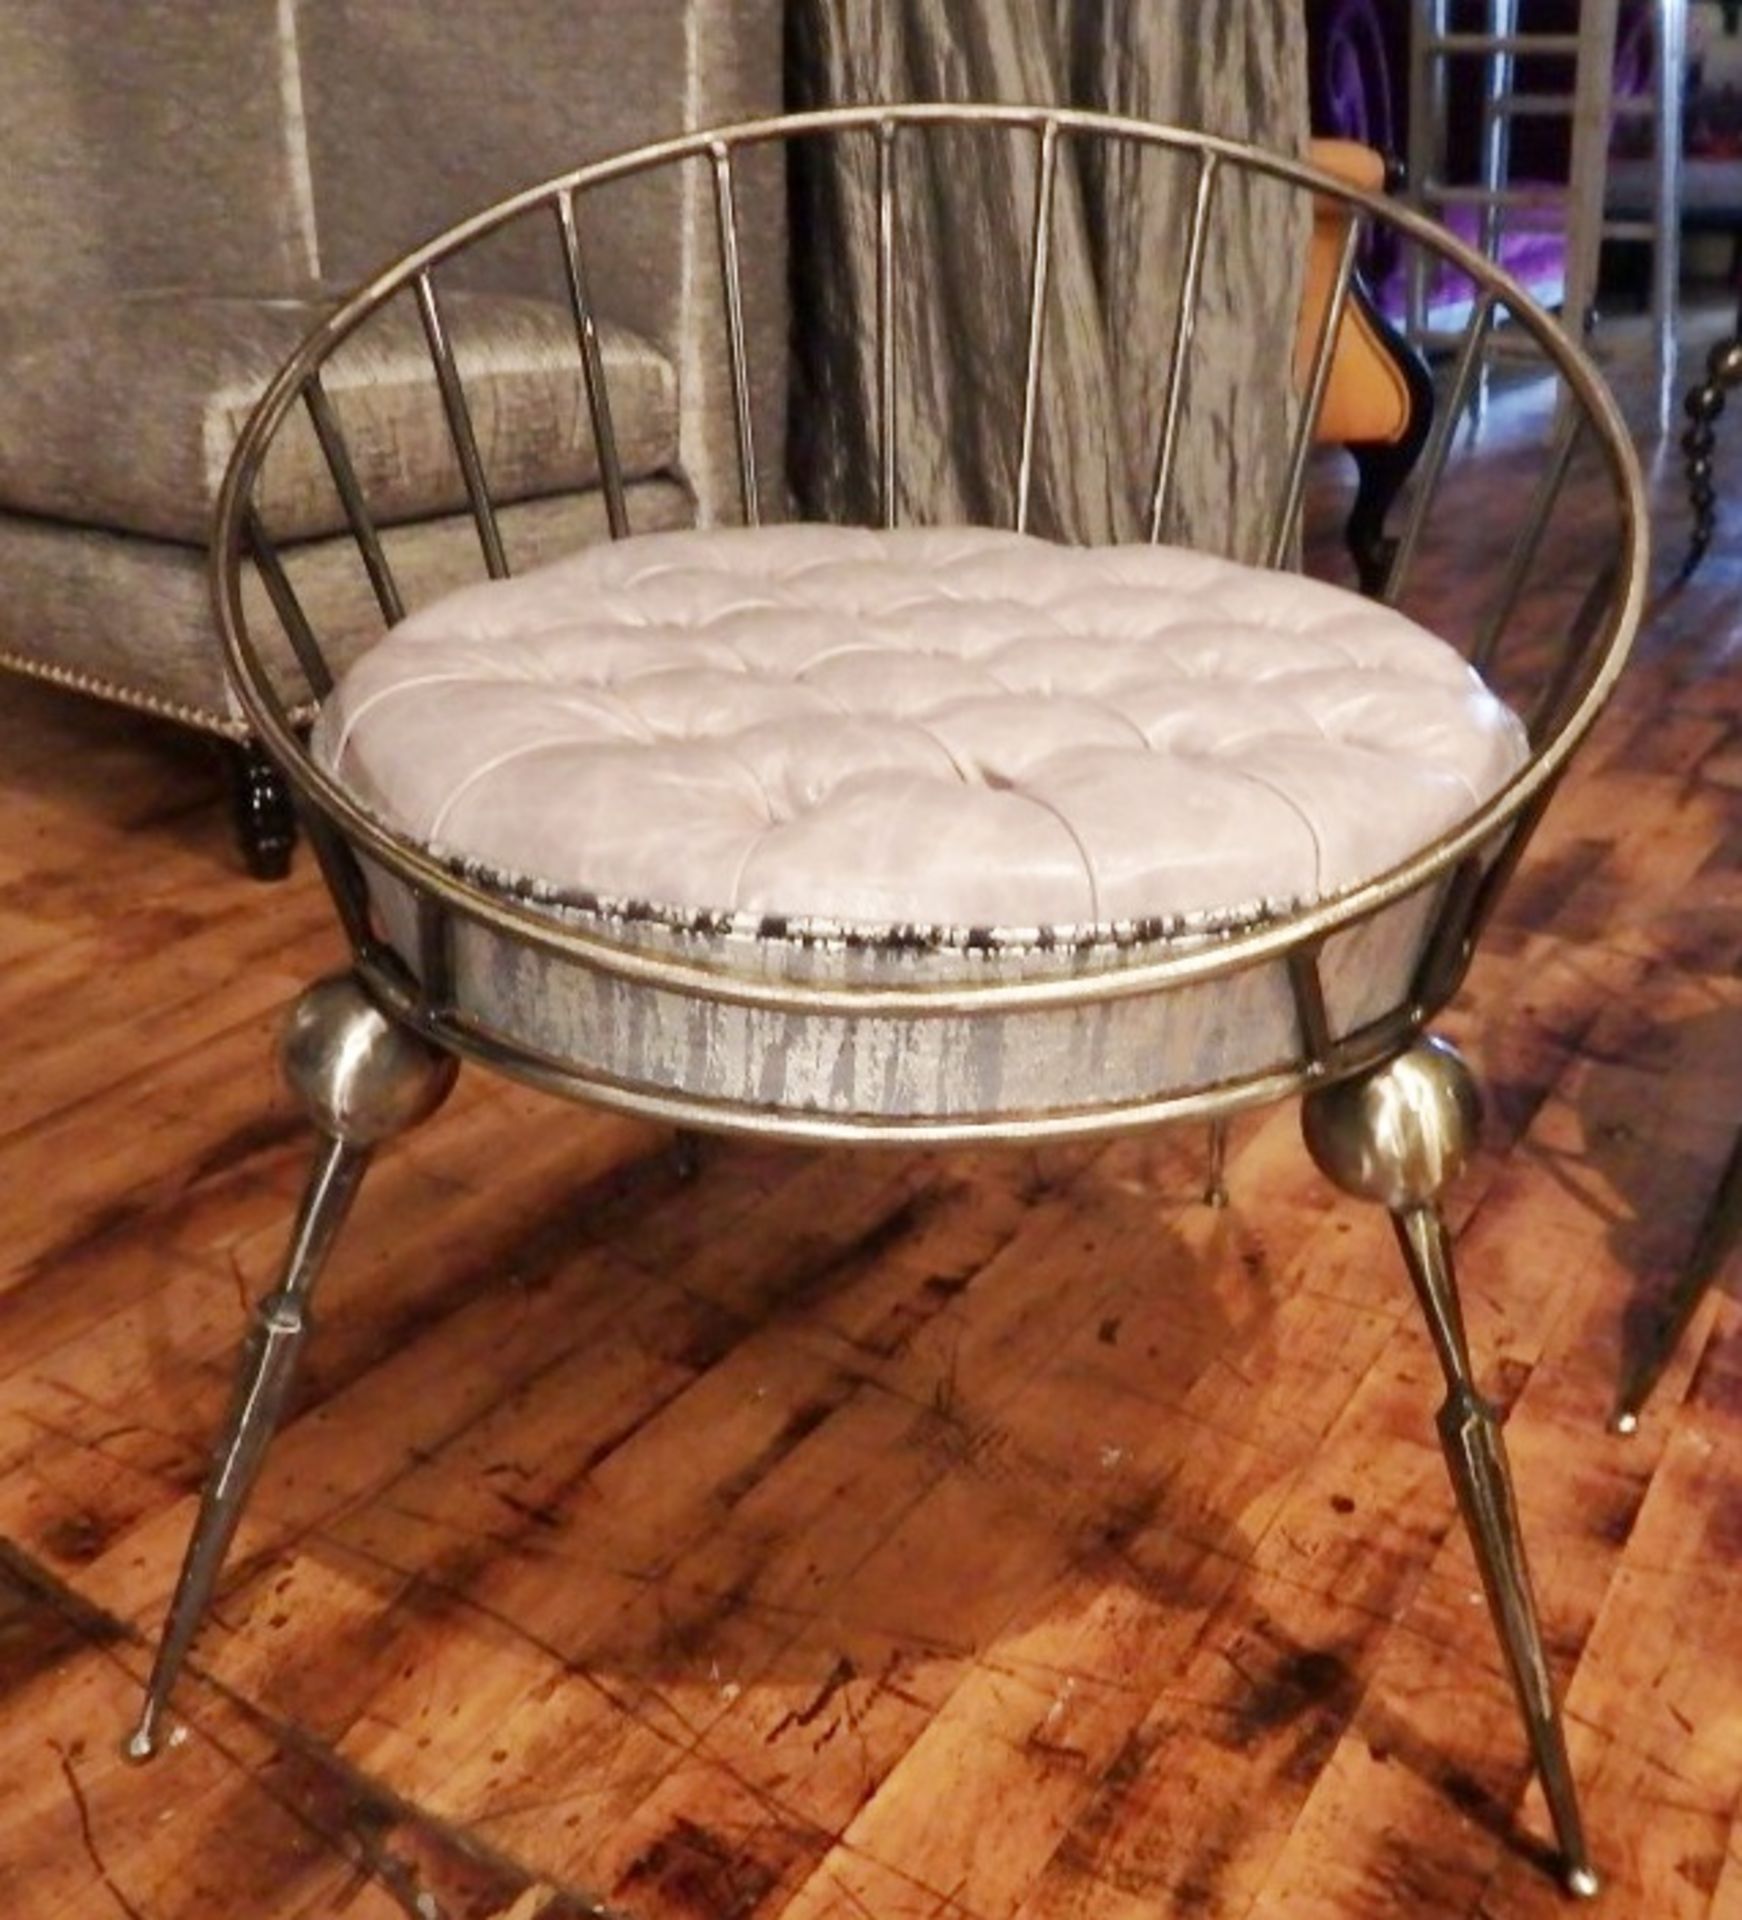 1 x Bespoke Handcrafted Chair - Unique Metal Framework With Leather Upholstered Cushion  - Colour: - Image 2 of 6